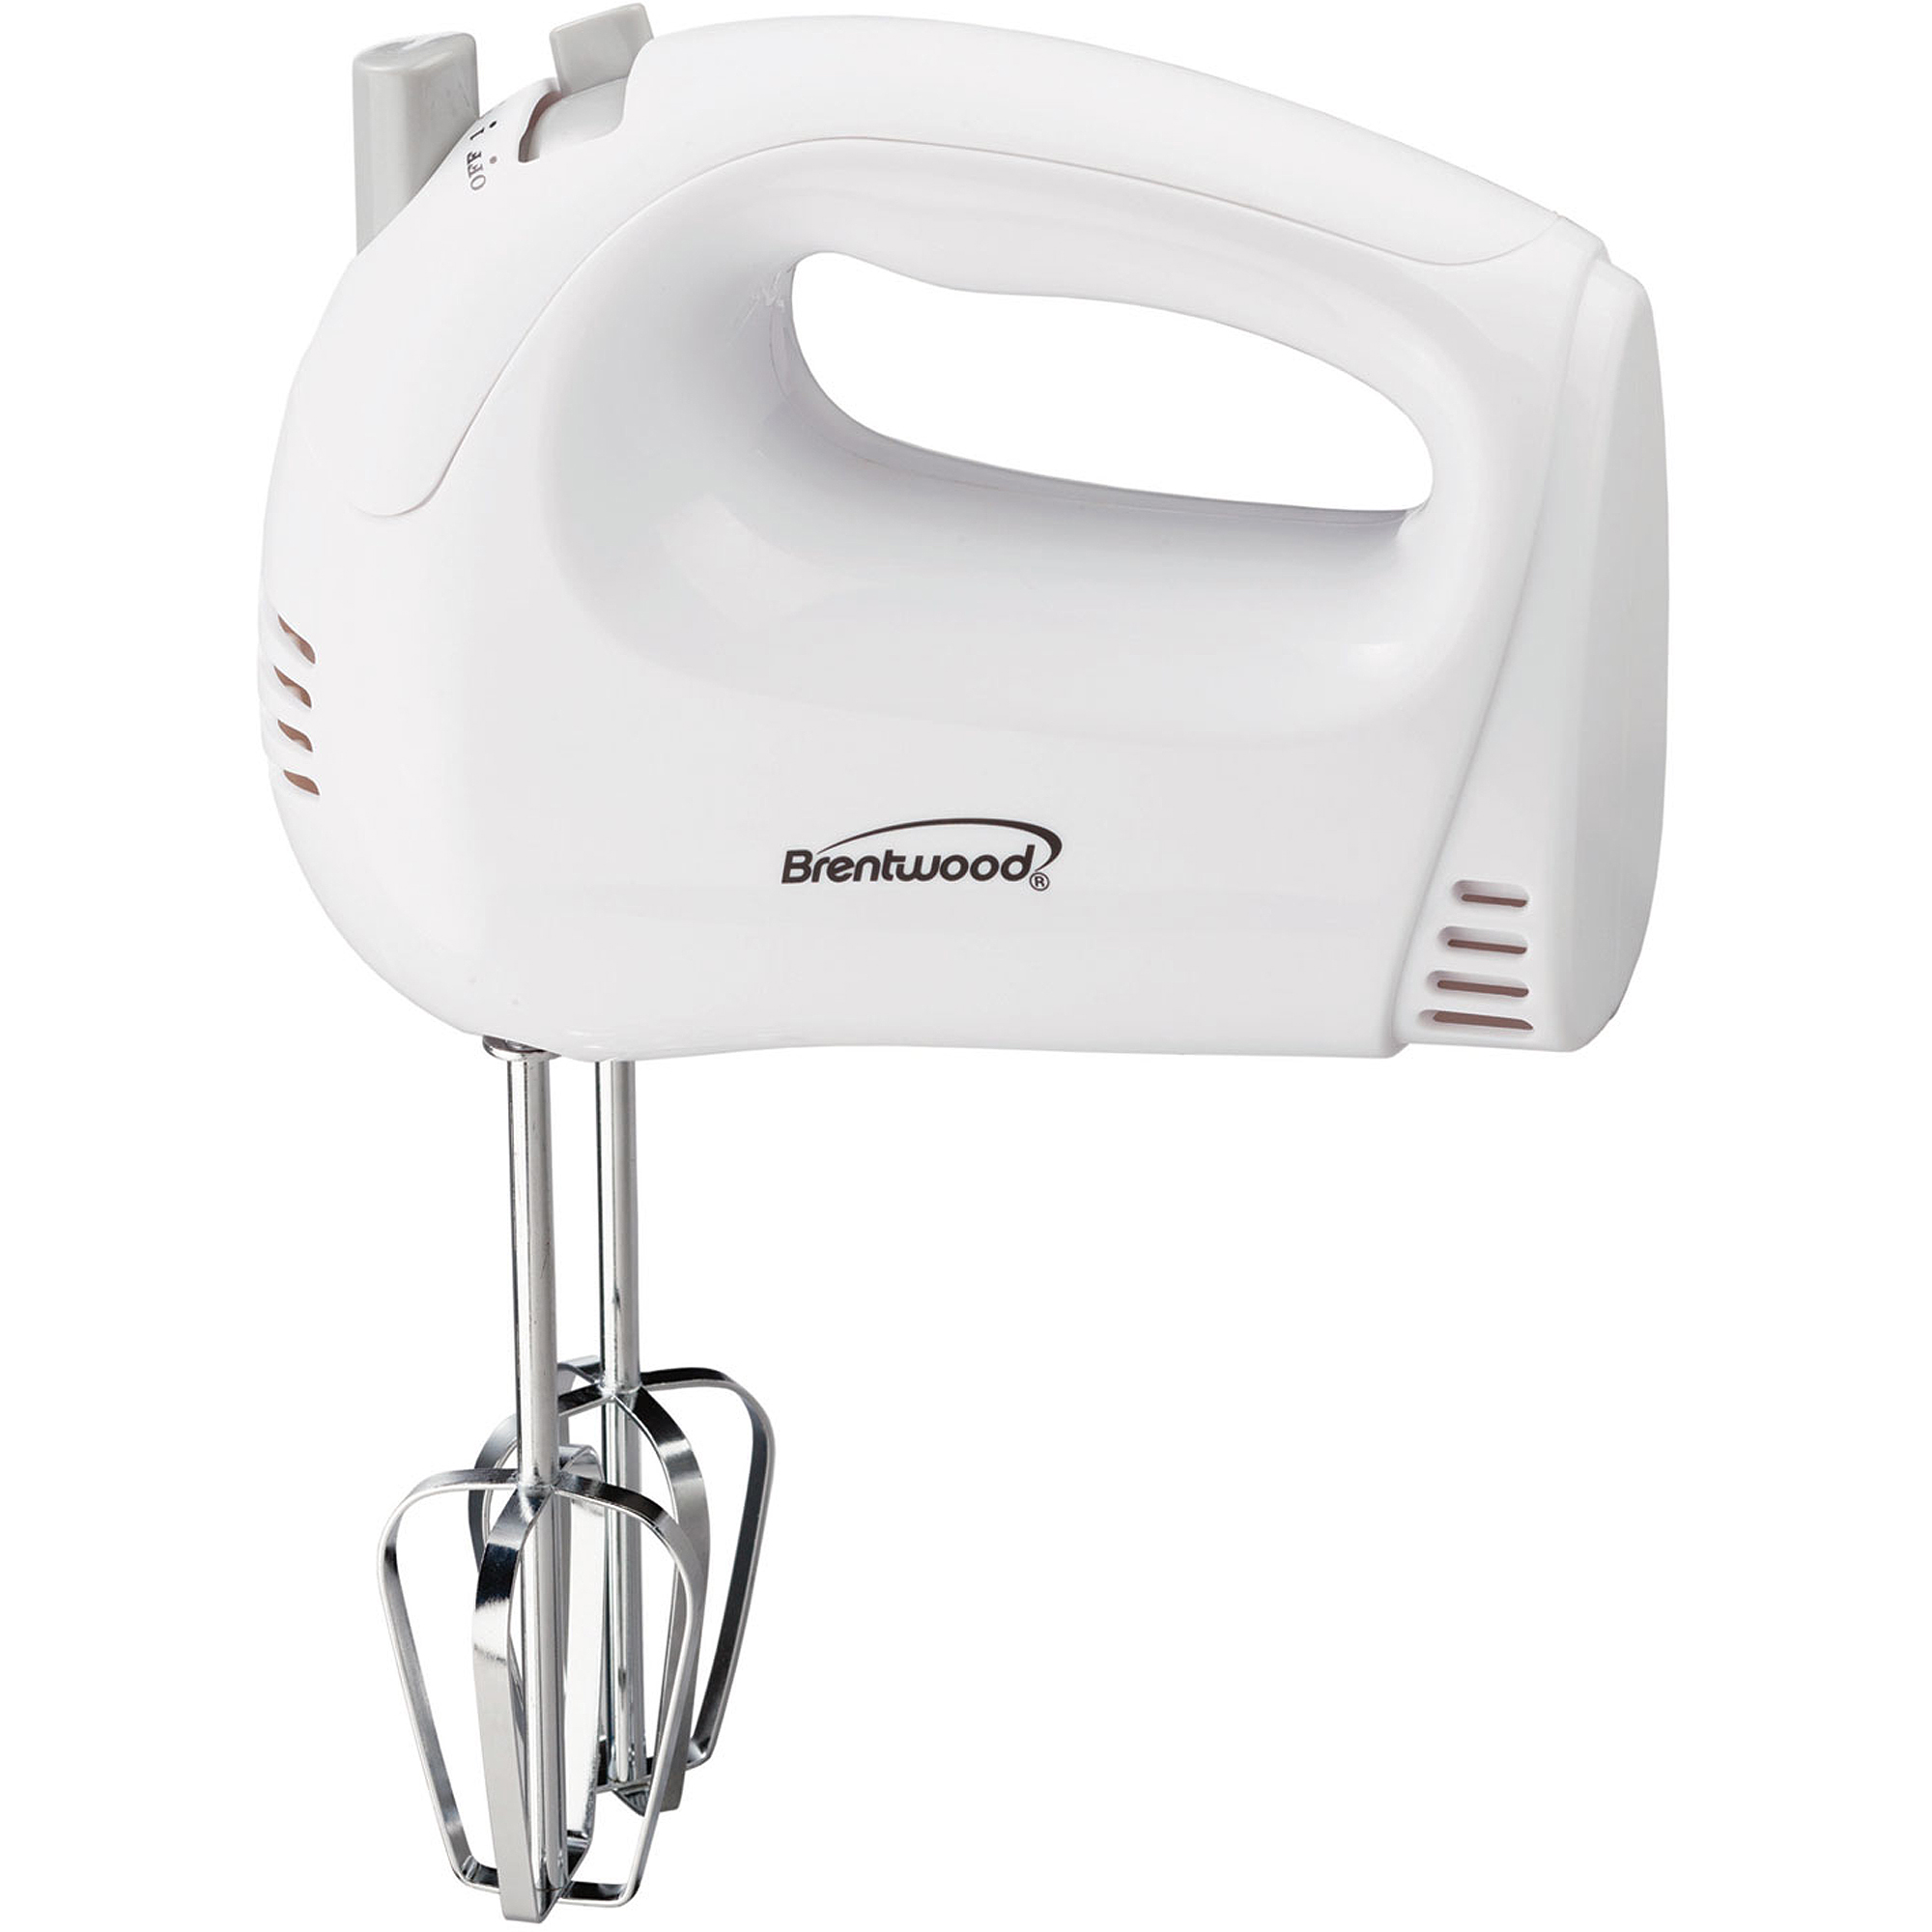 Brentwood HM-45 Lightweight 5-Speed Electric Hand Mixer, White - image 1 of 8